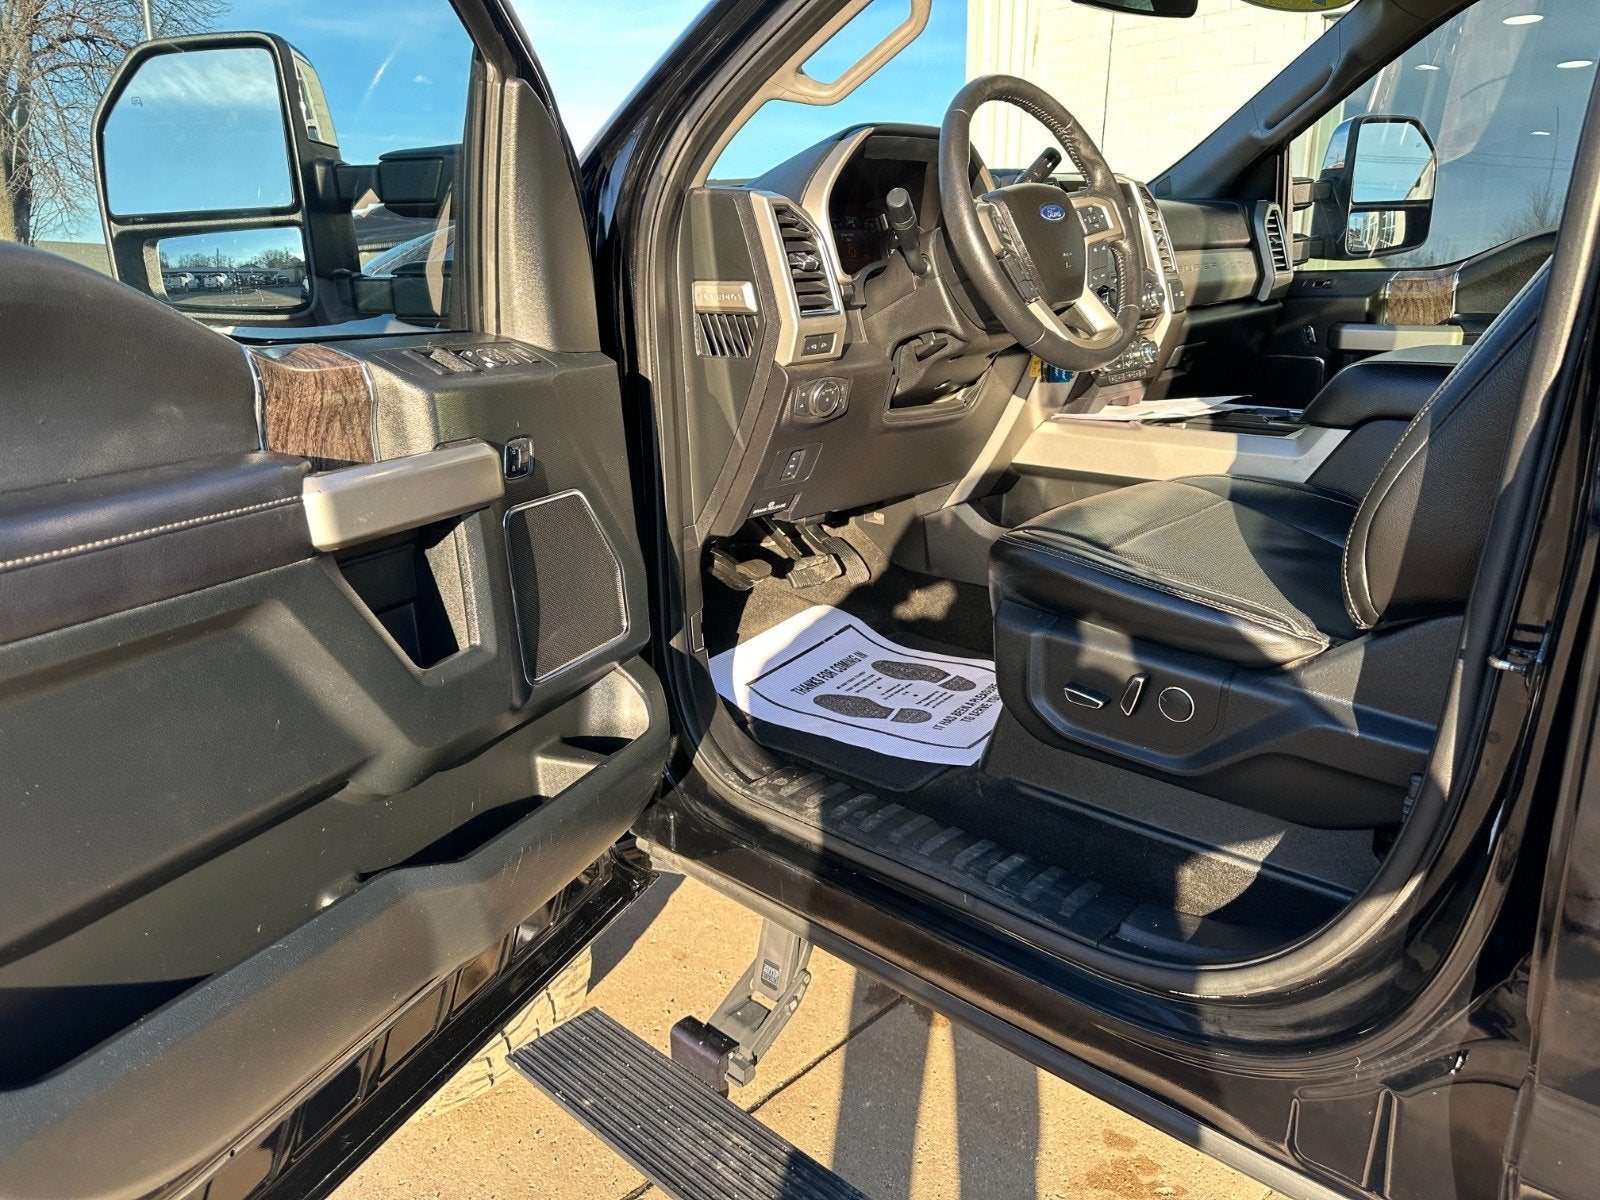 2017 Ford F-350 Lariat, Powerstroke Diesel, Power Boards, Heated & Vented Seats